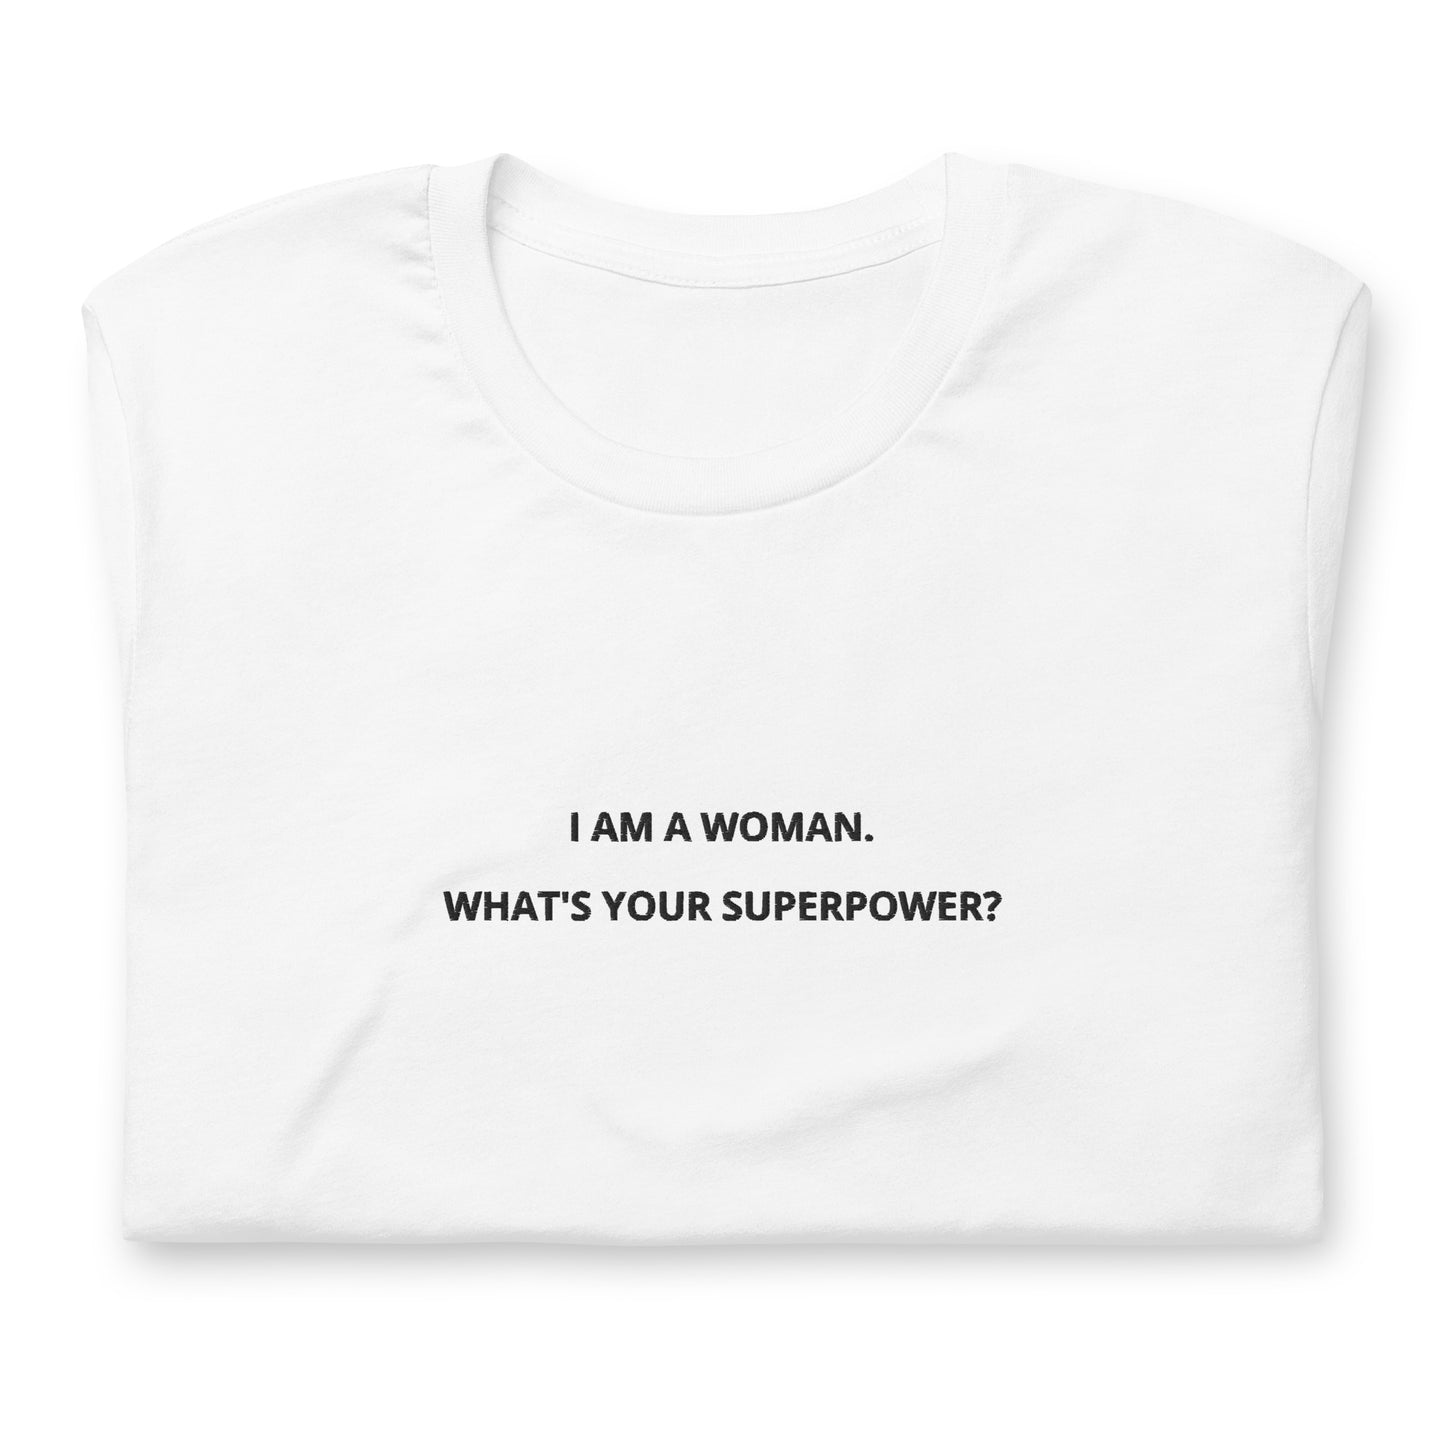 I AM A WOMAN. WHAT’S YOUR SUPERPOWER? - embroidered T-shirt